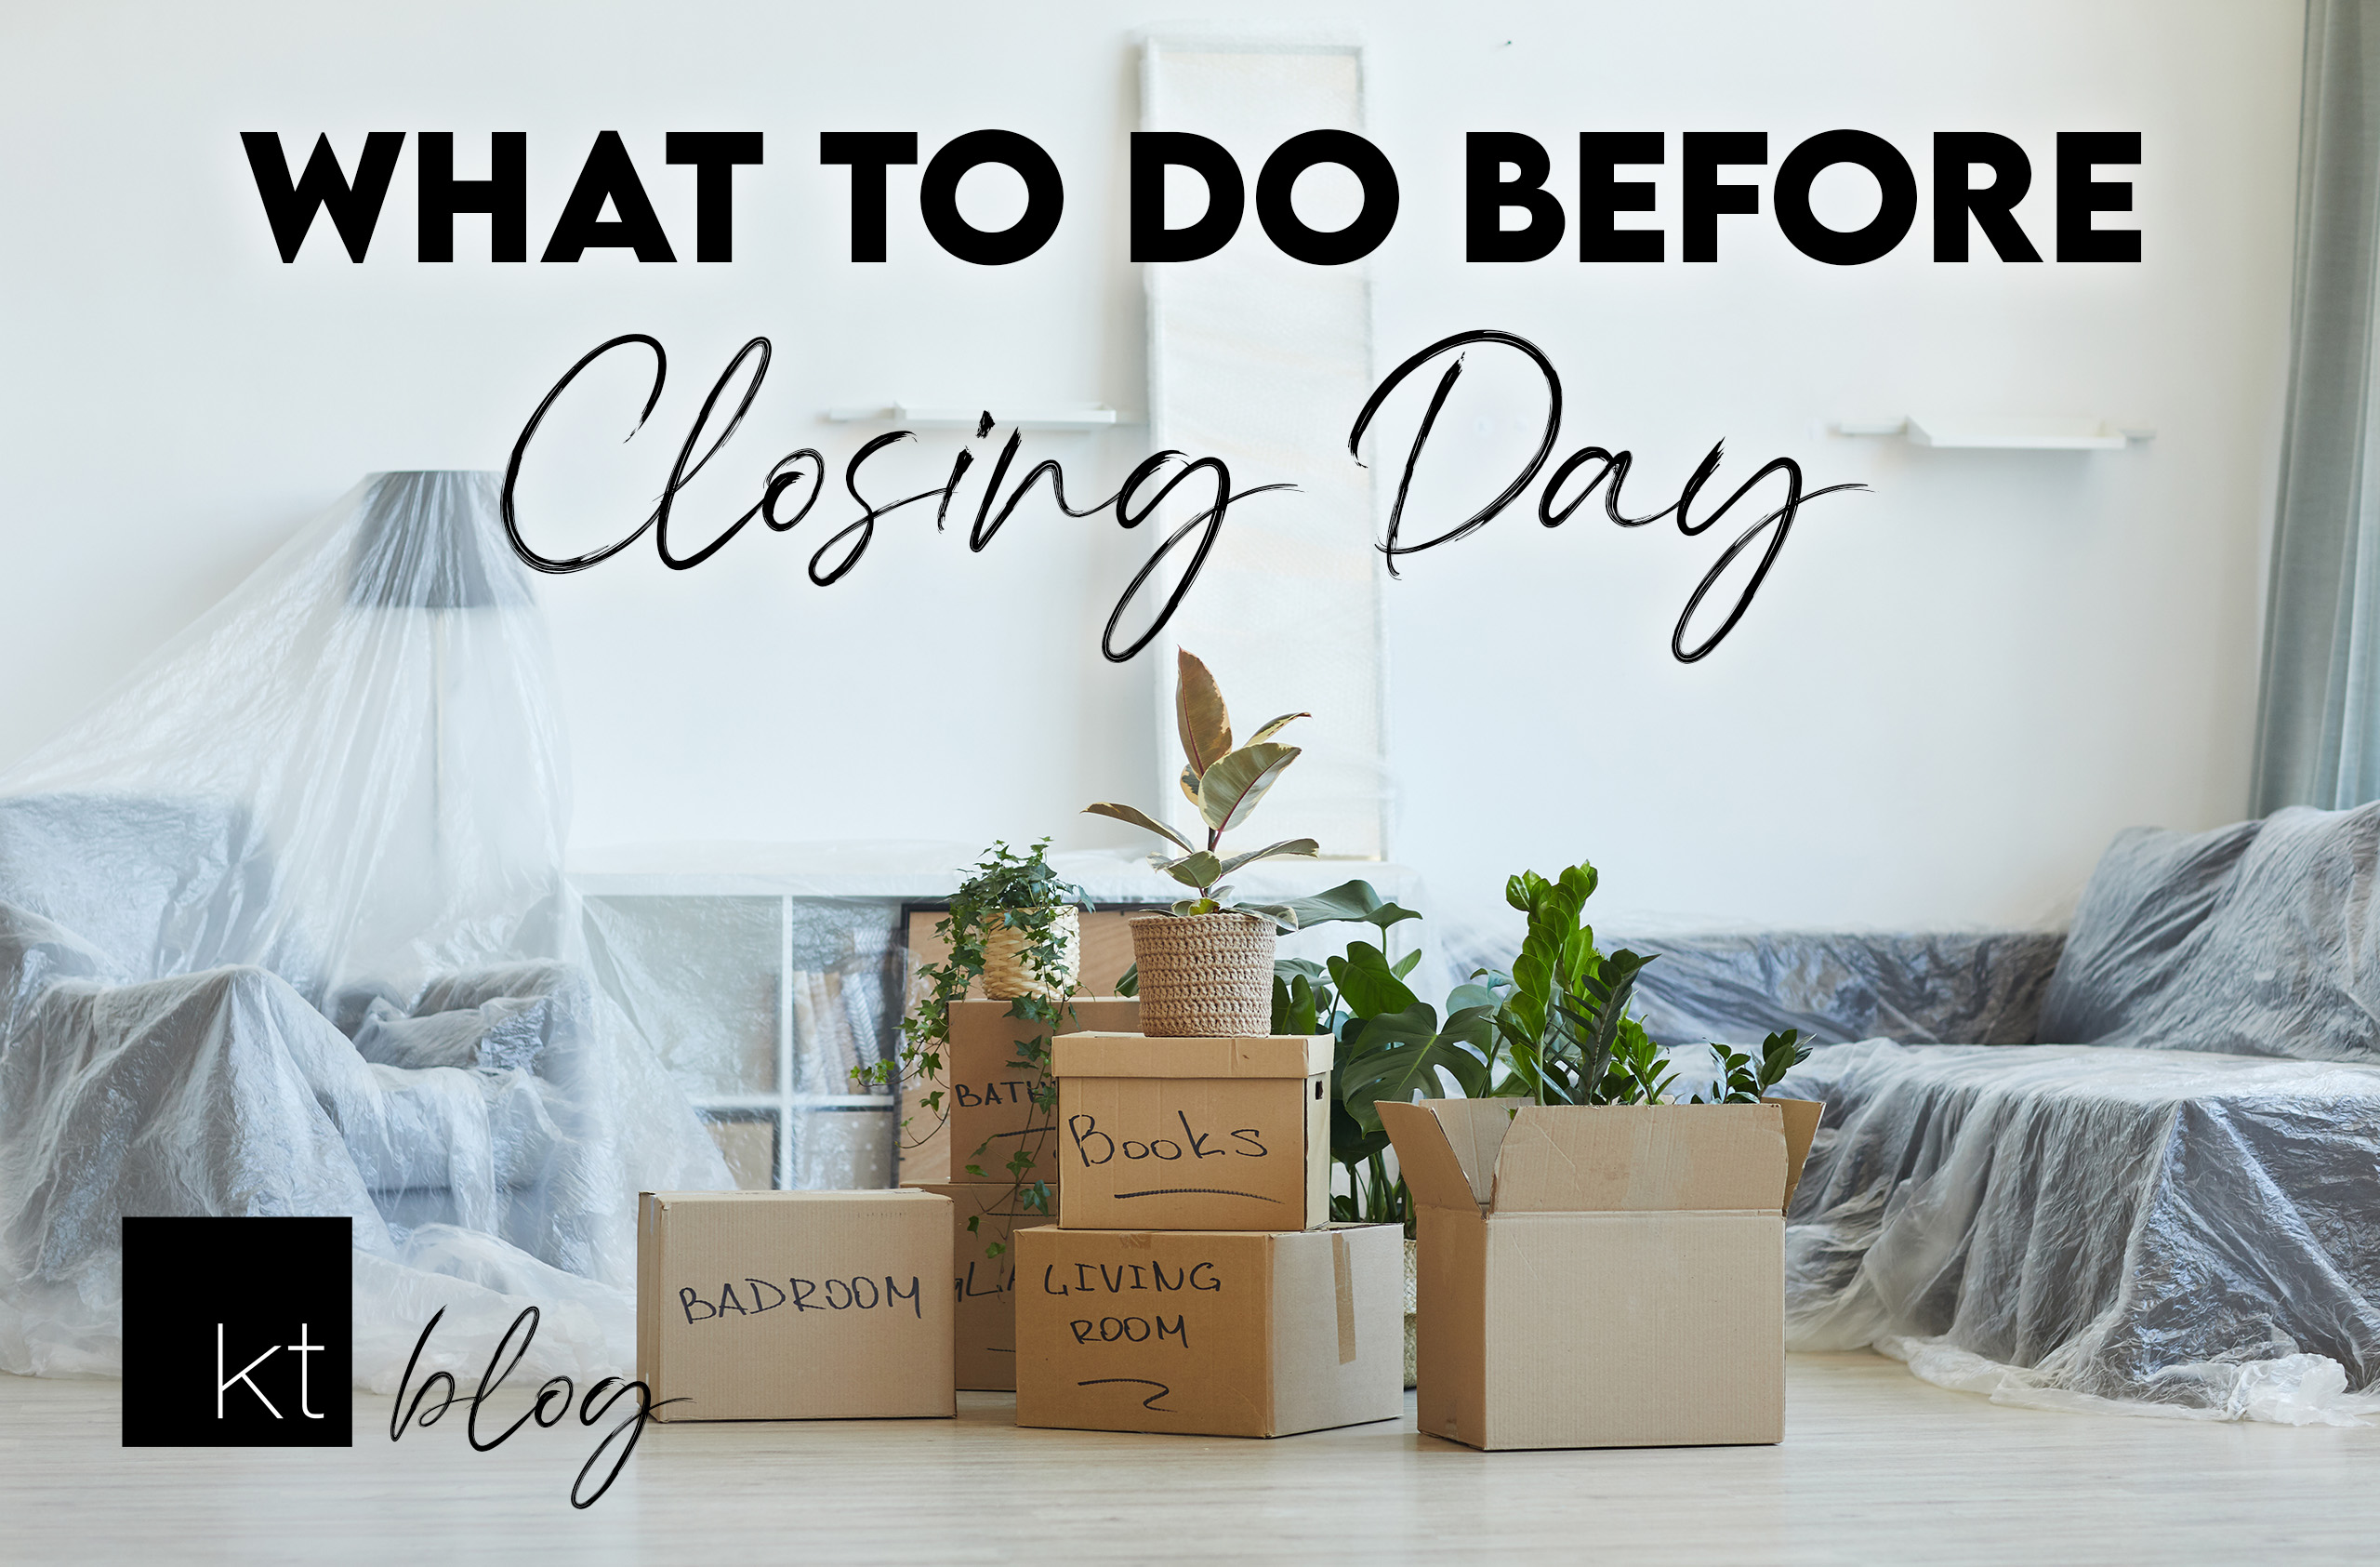 What To Do Before Closing Day